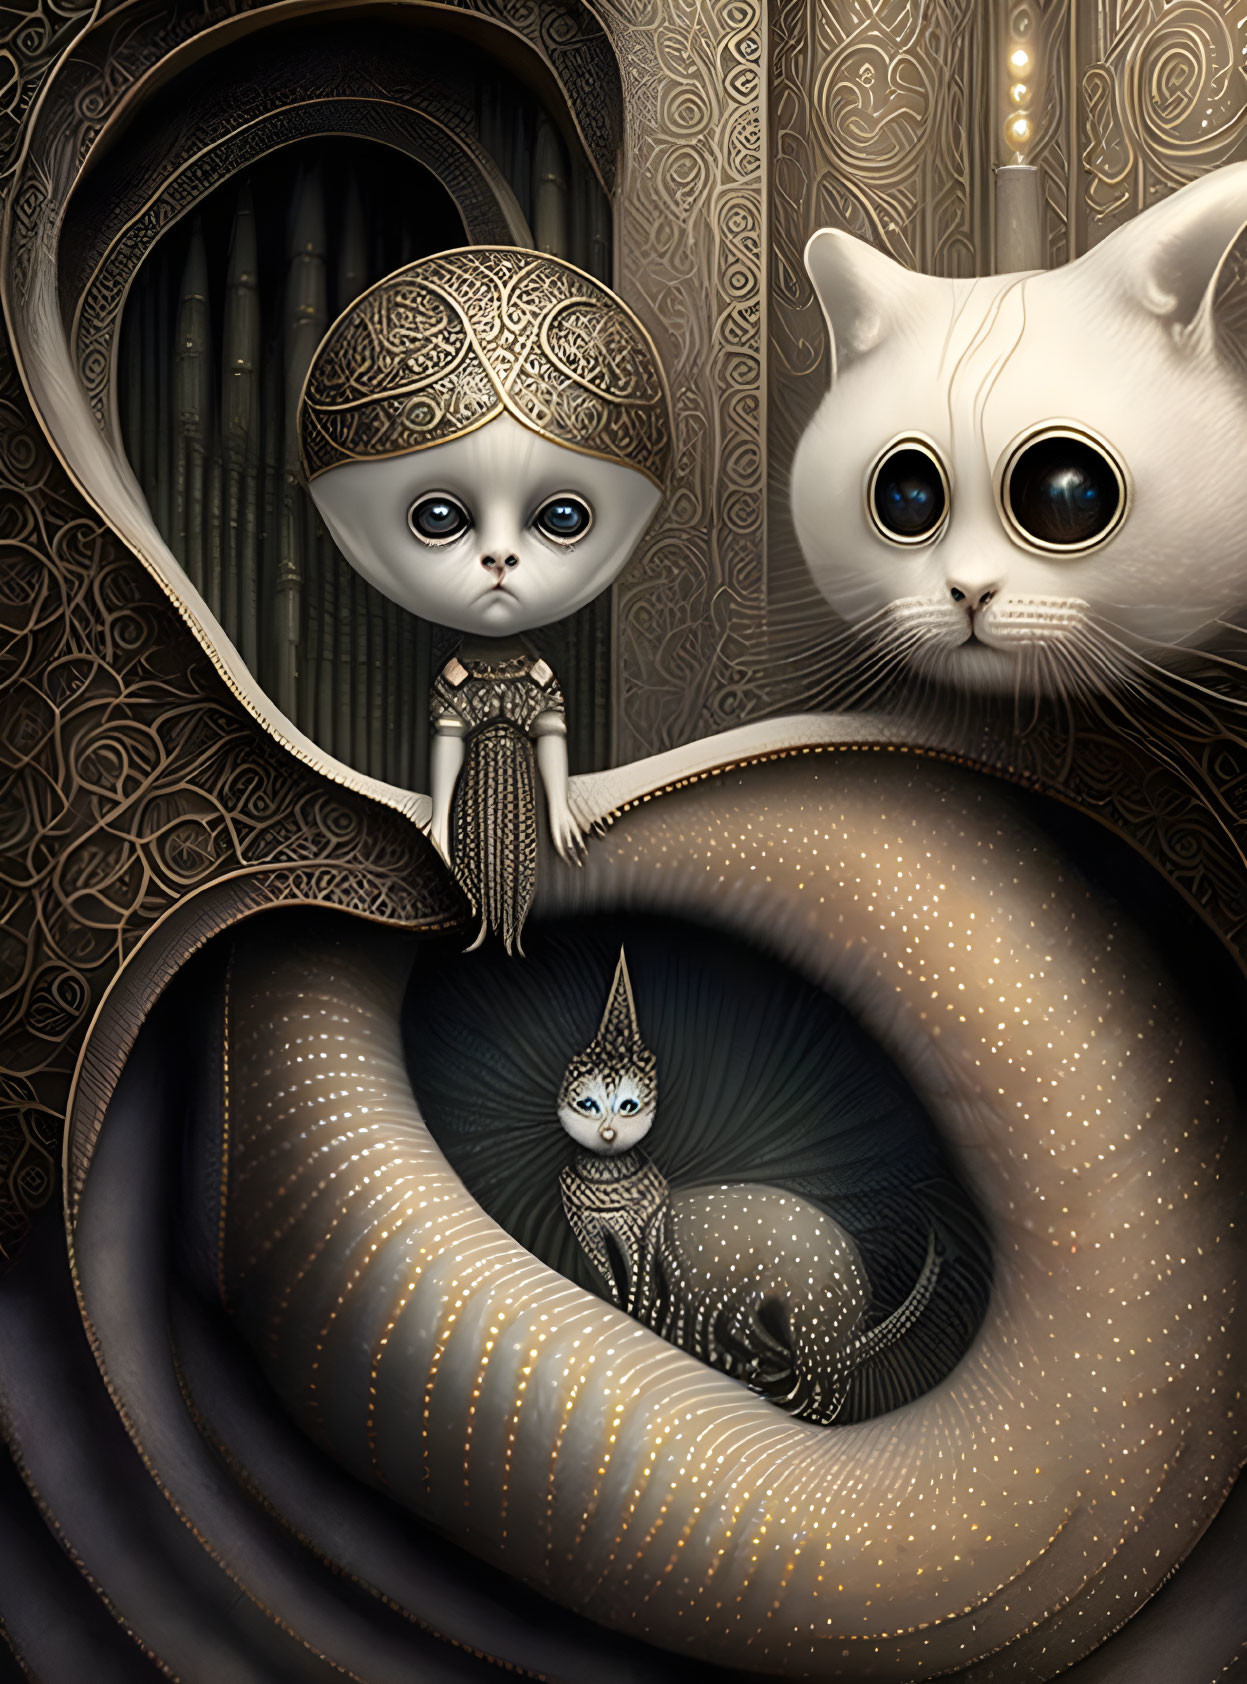 Surreal illustration of big-eyed child, white cat, and striped cat